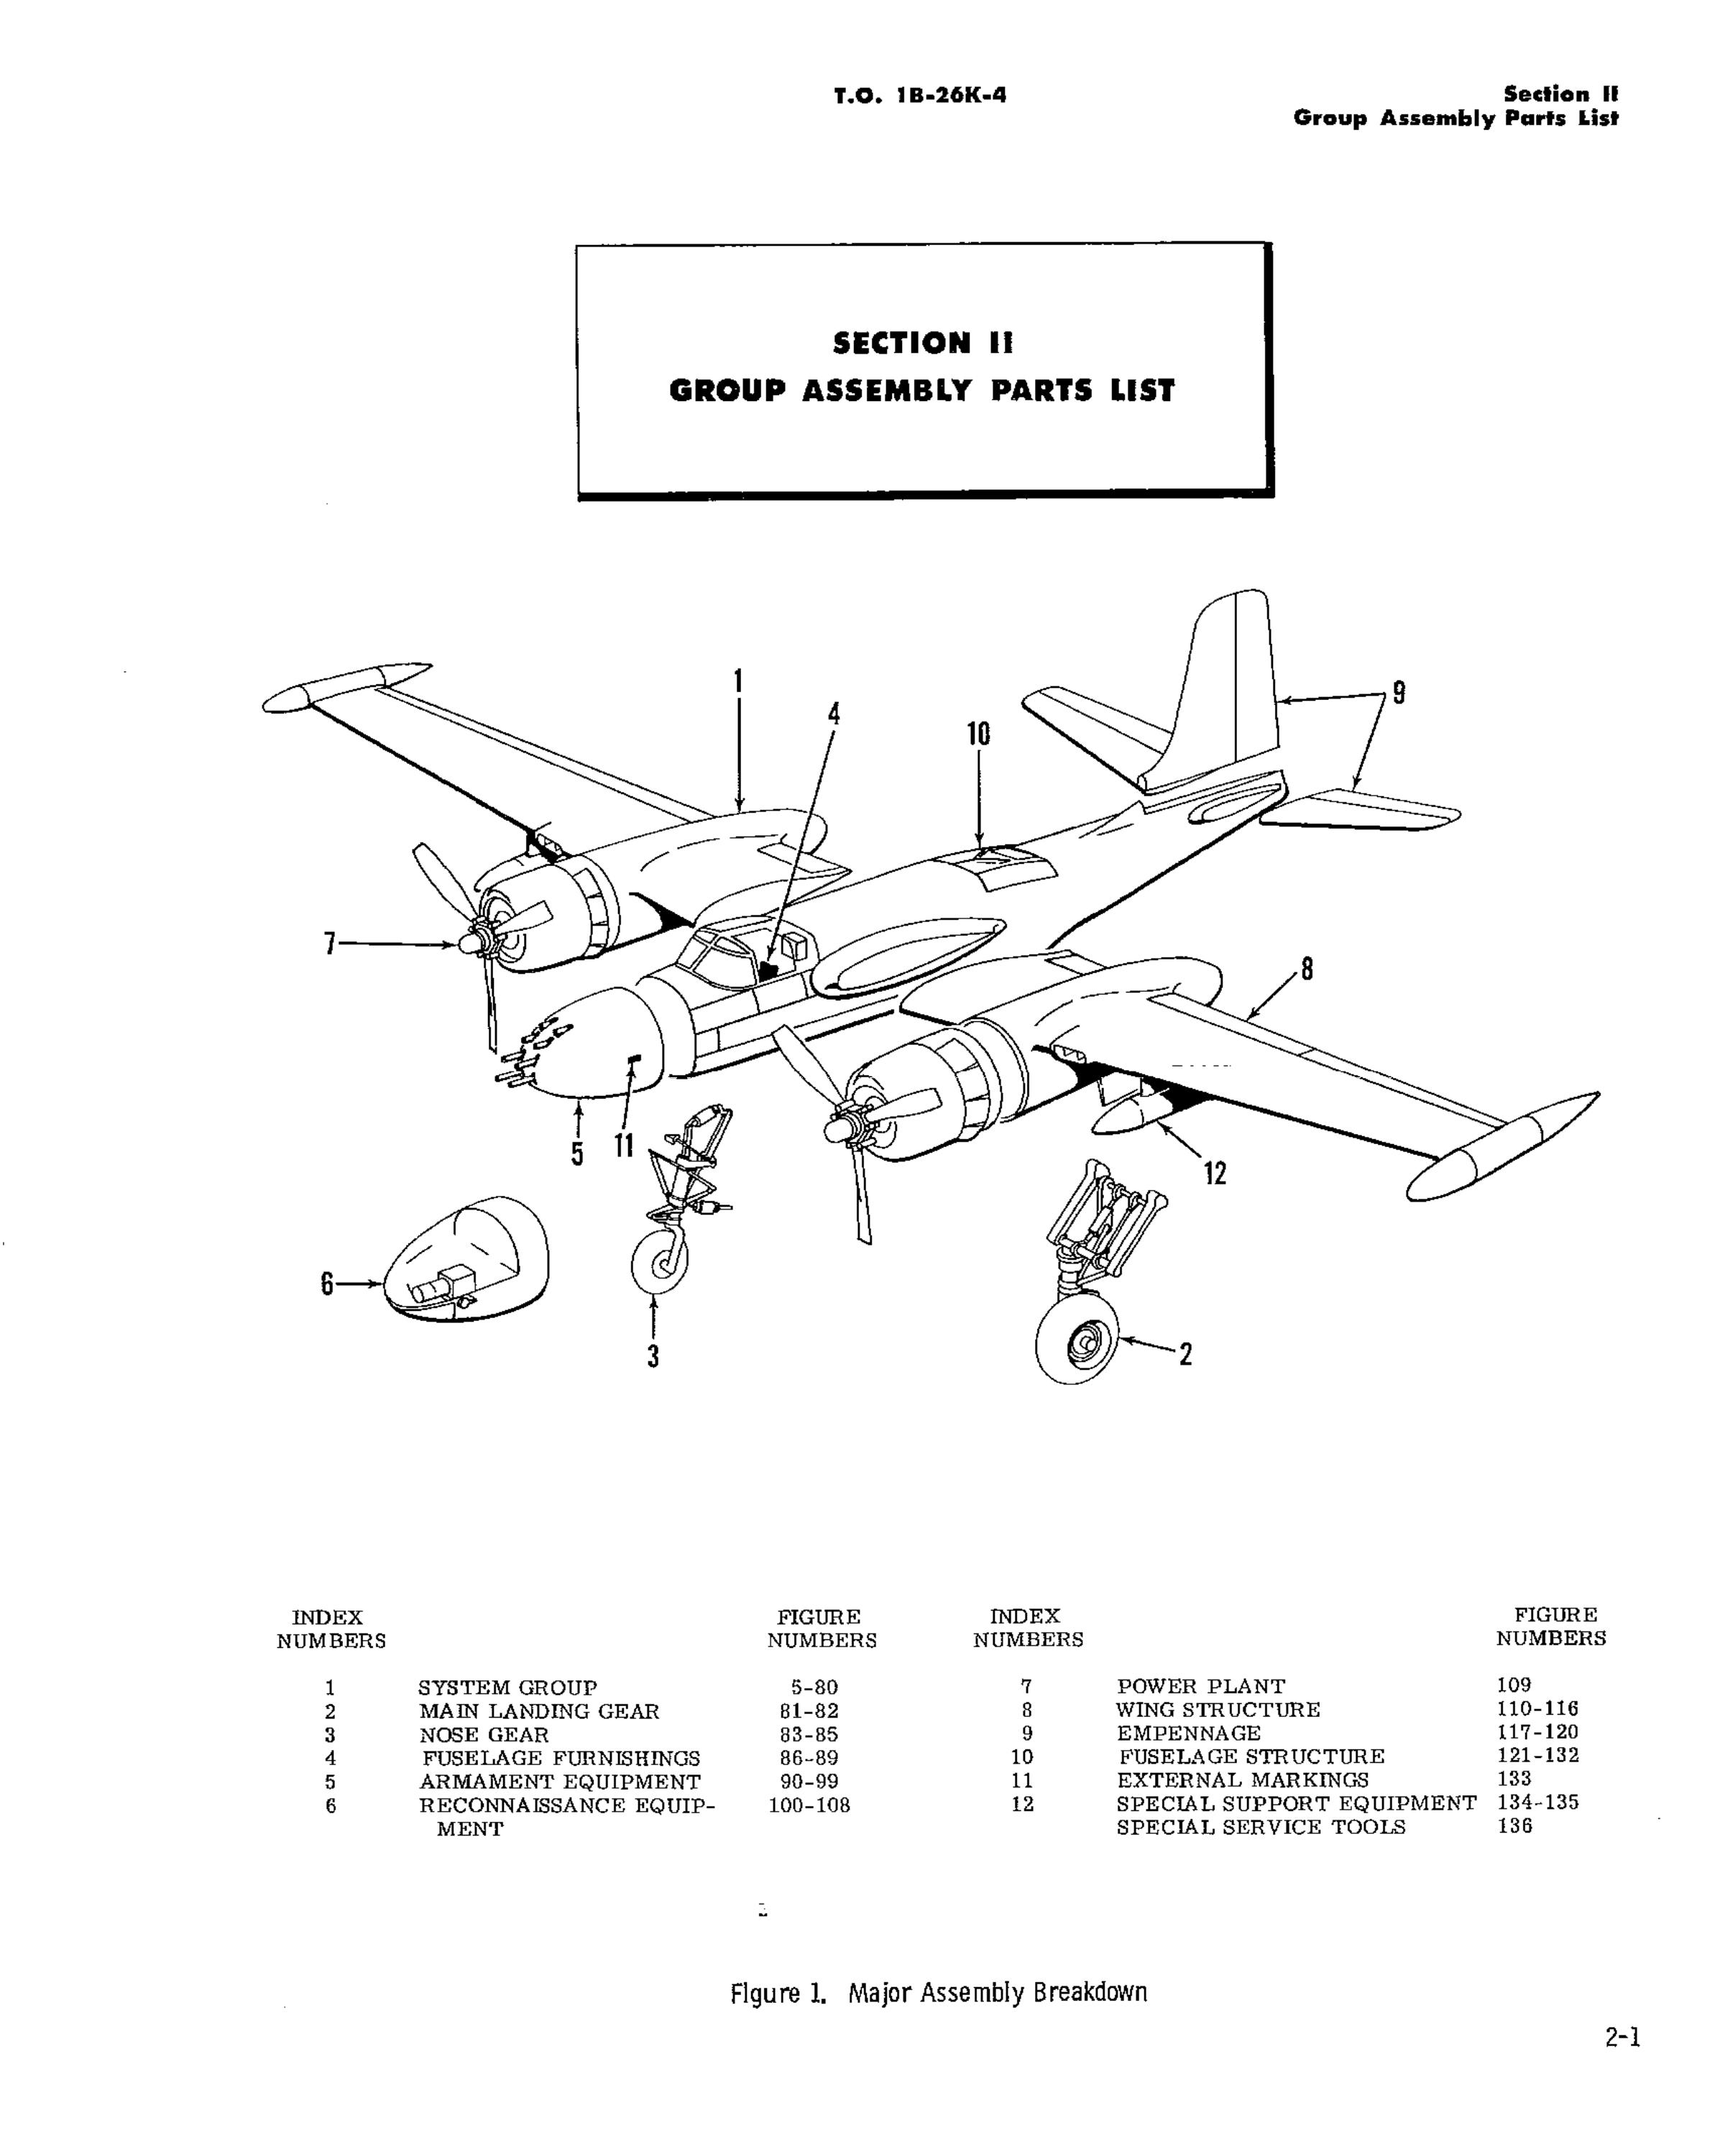 Sample page 19 from AirCorps Library document: Illustrated Parts Breakdown for B-26K Series Aircraft